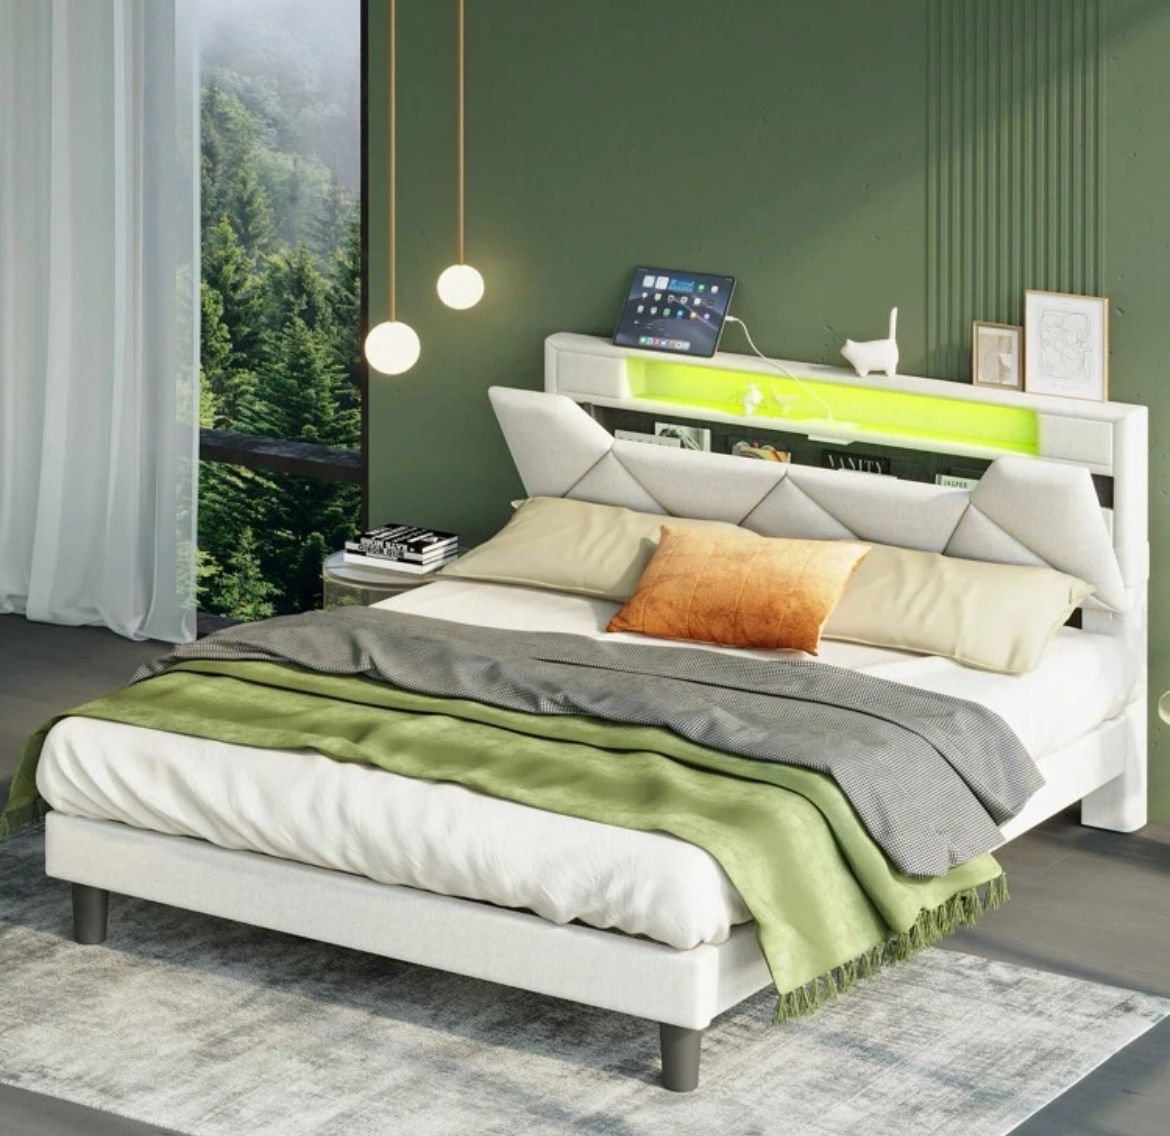 Queen Storage Bed - Upholstered Headboard With Charging, LED Lighting, Sturdy Steel Frame